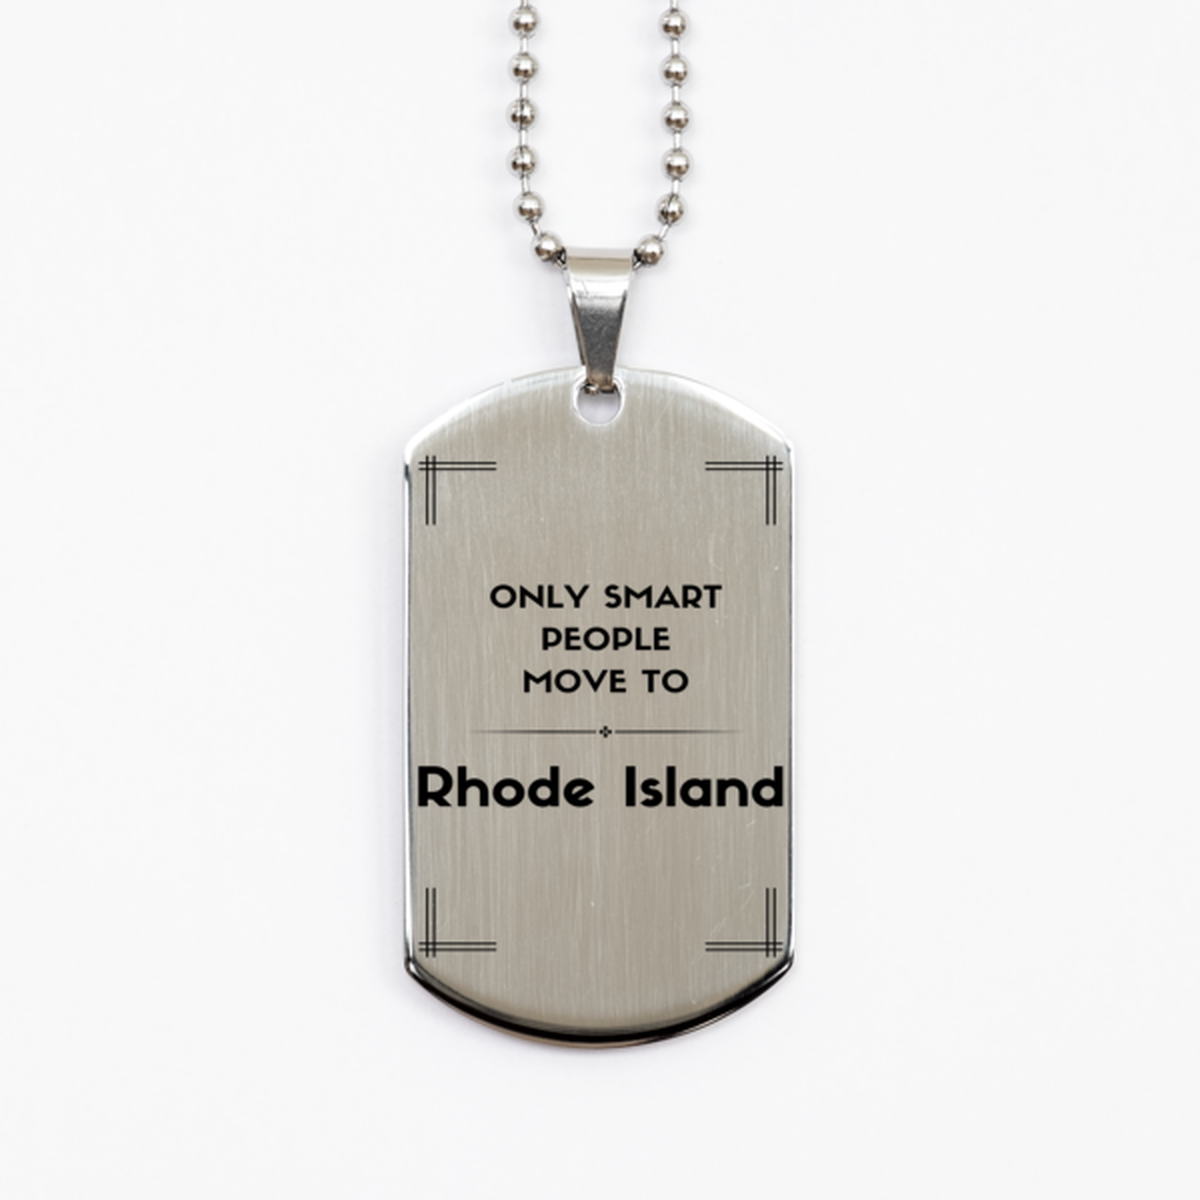 Only smart people move to Rhode Island Silver Dog Tag, Gag Gifts For Rhode Island, Move to Rhode Island Gifts for Friends Coworker Funny Saying Quote